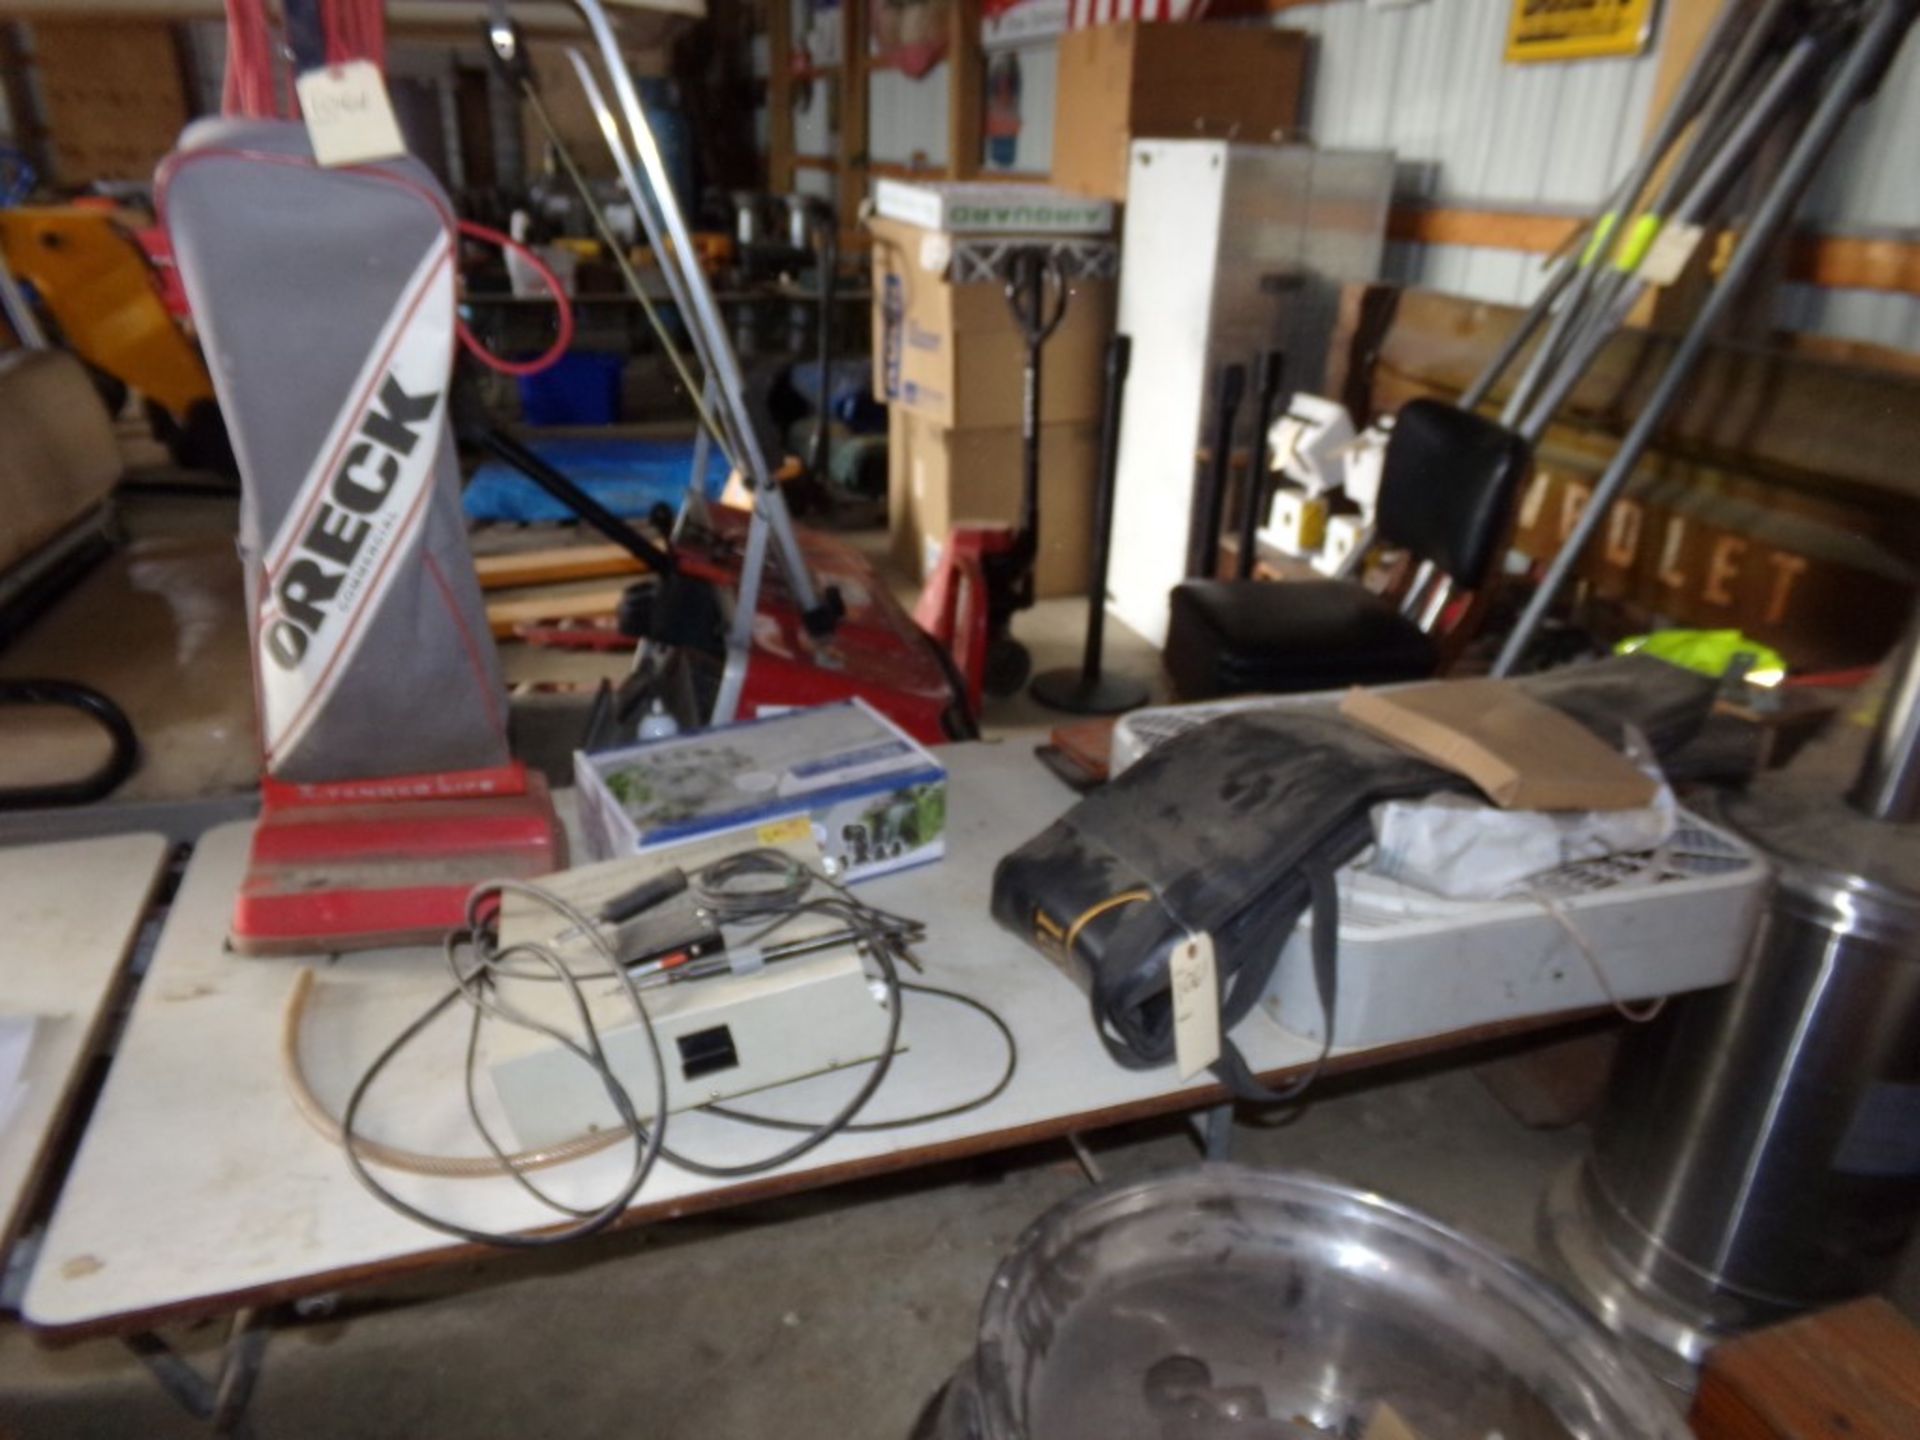 Group Of Misc. Items On Table, Box Fan, Oreck Vacuum, Check Valve For Landscape Pond, Etc., Includes